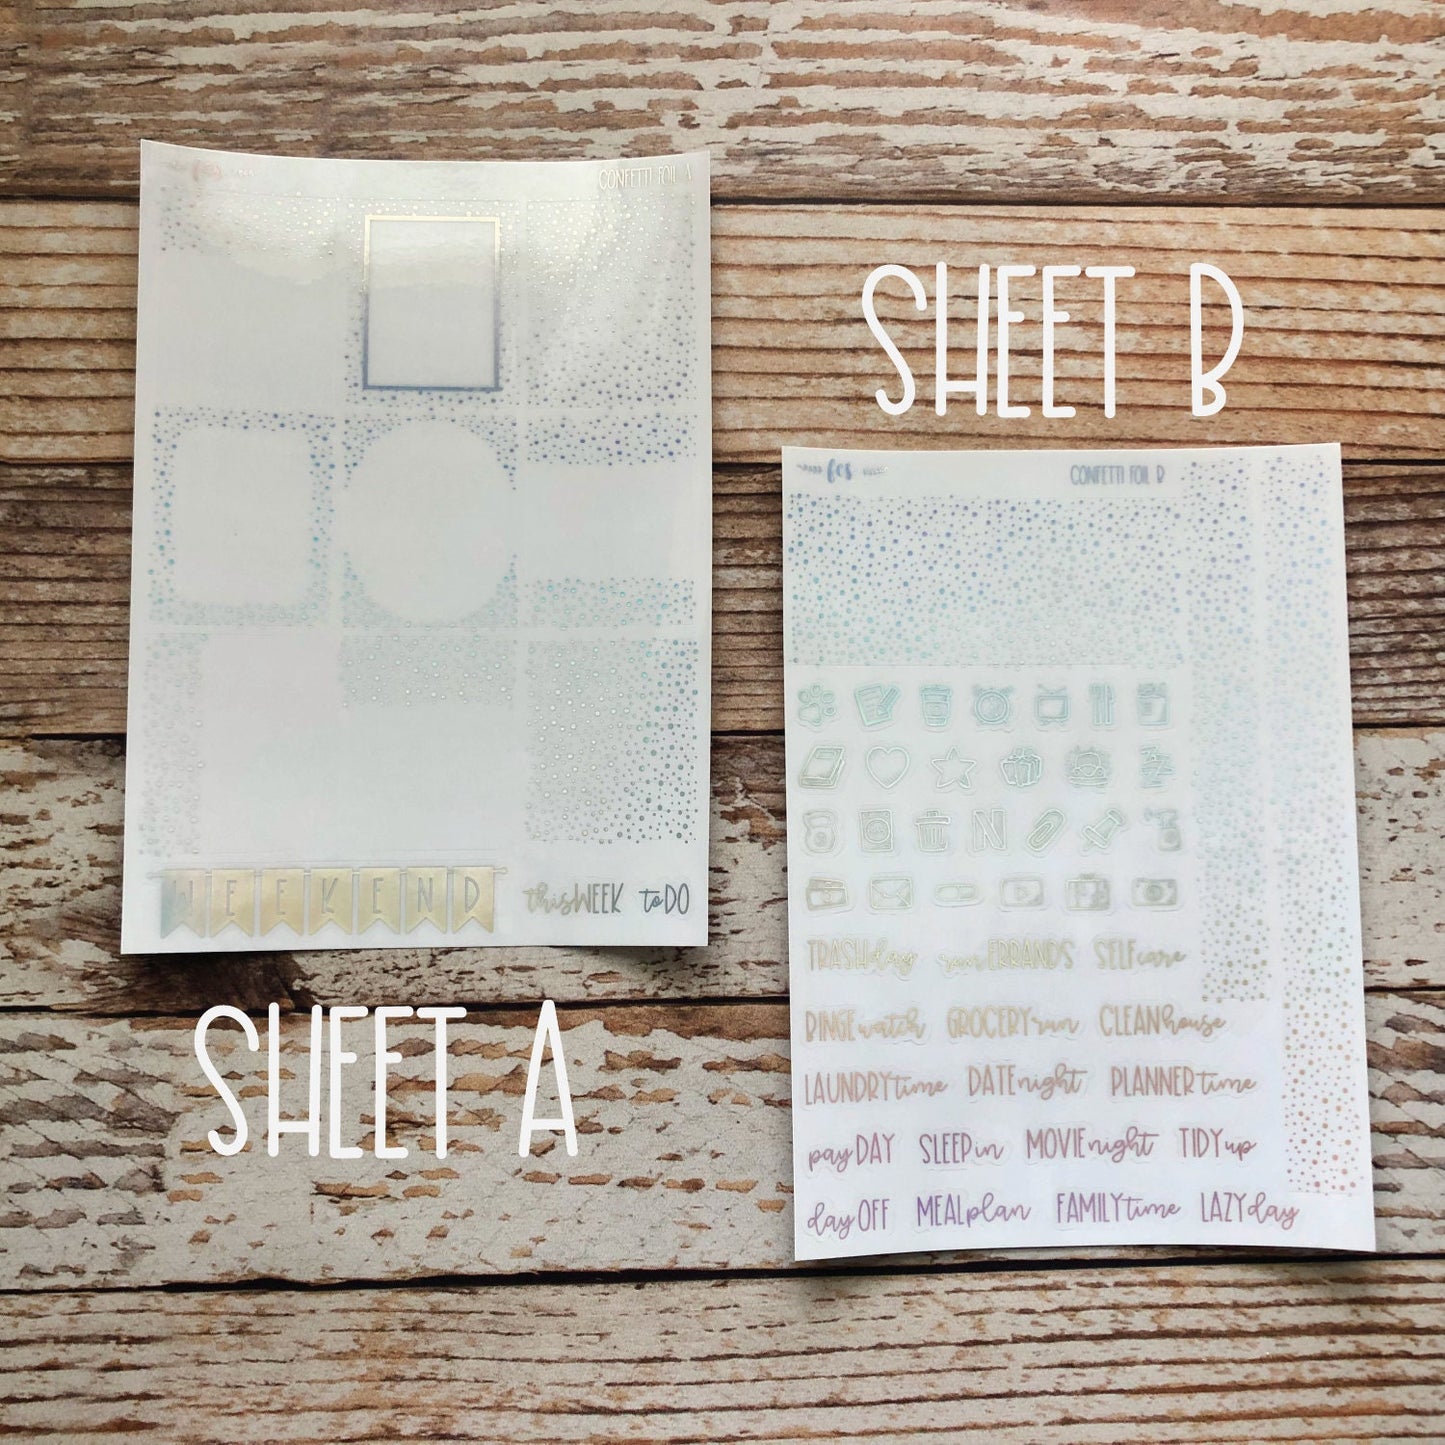 FB-02 || CONFETTI Foil Bundle | confetti clear foiled stickers | foiled planner stickers | full box overlays | header overlay | foiled icons